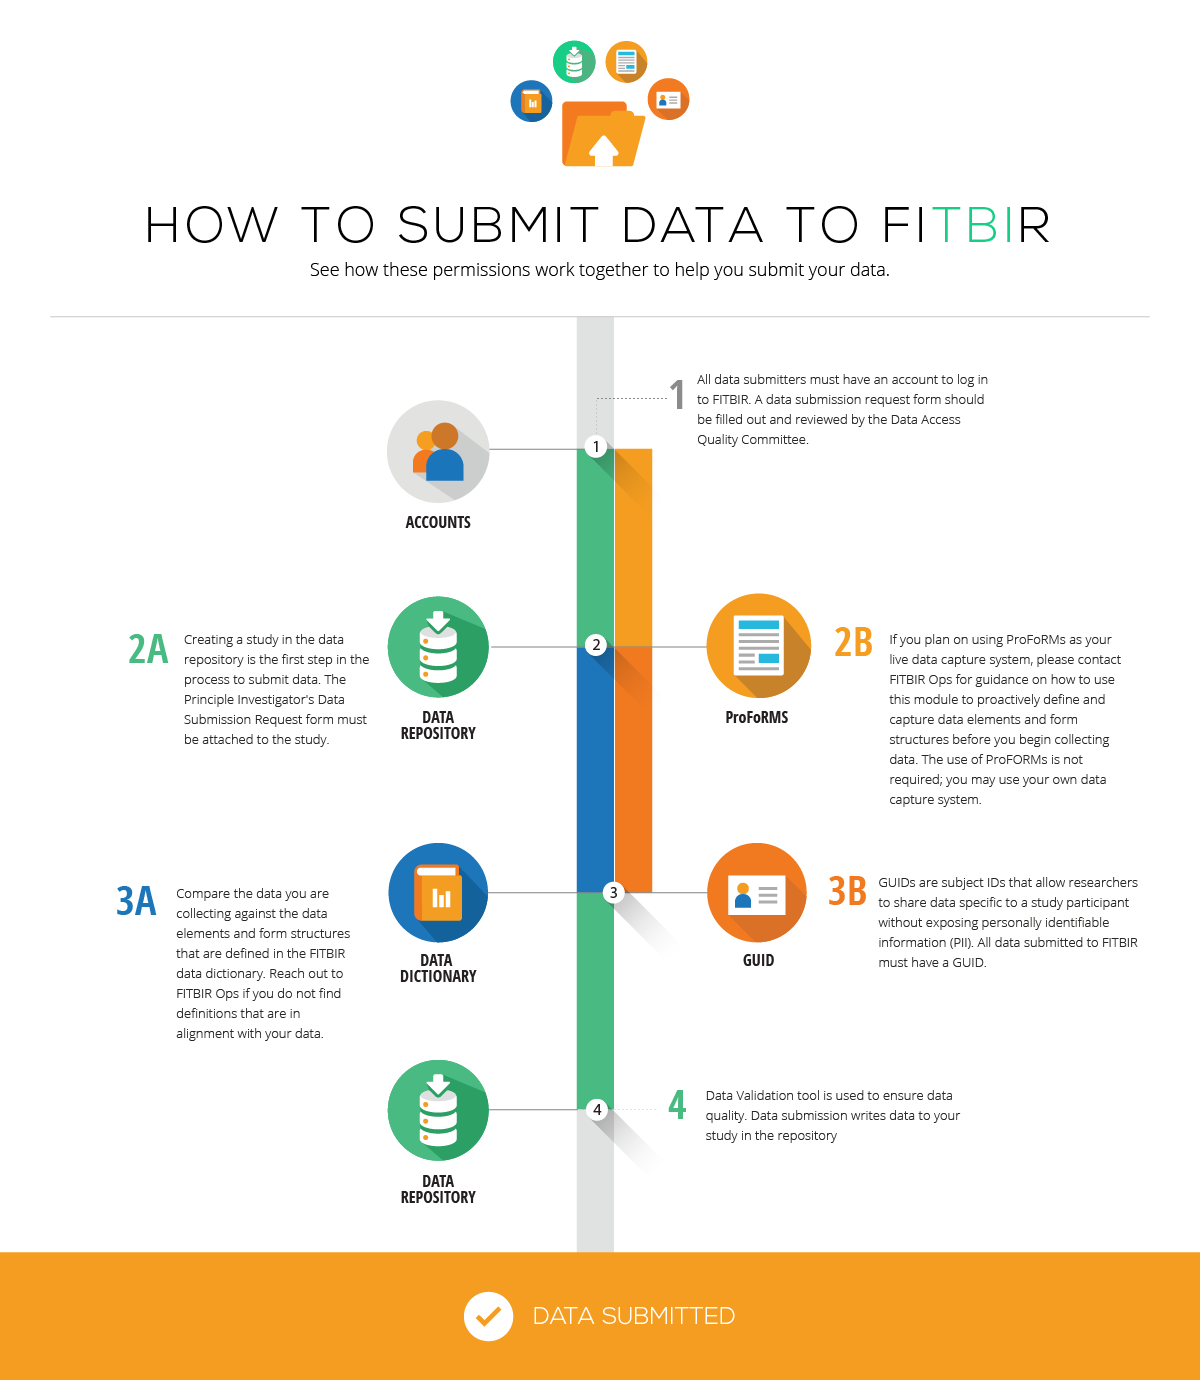 How to Submit Data to FITBIR